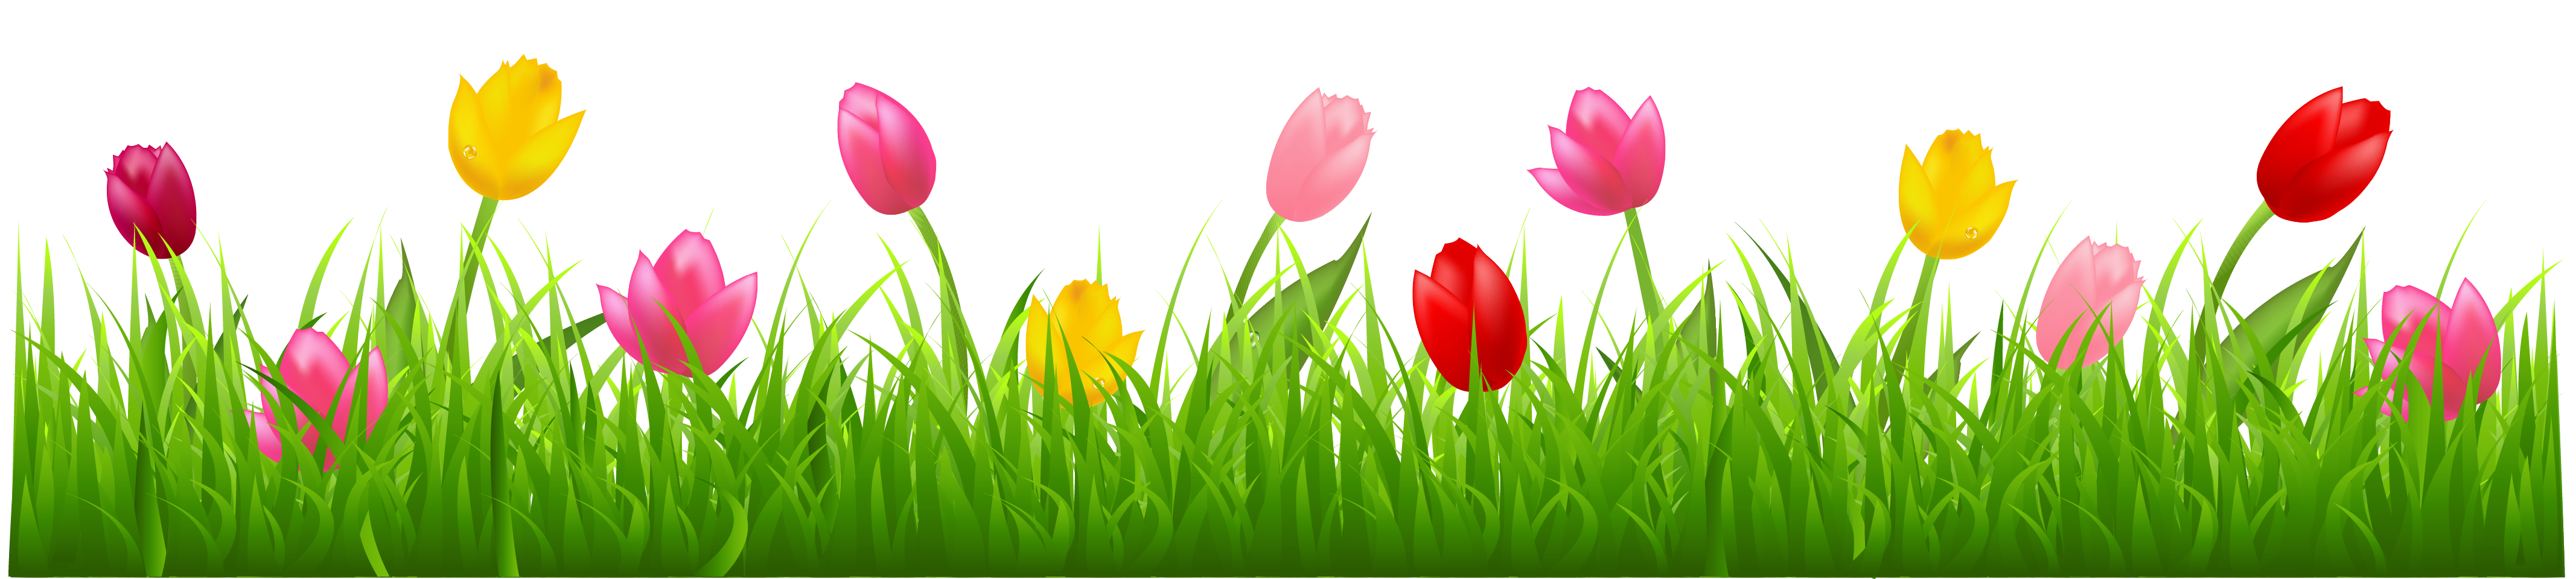 Grass with Colorful Tulips PNG Clipart 